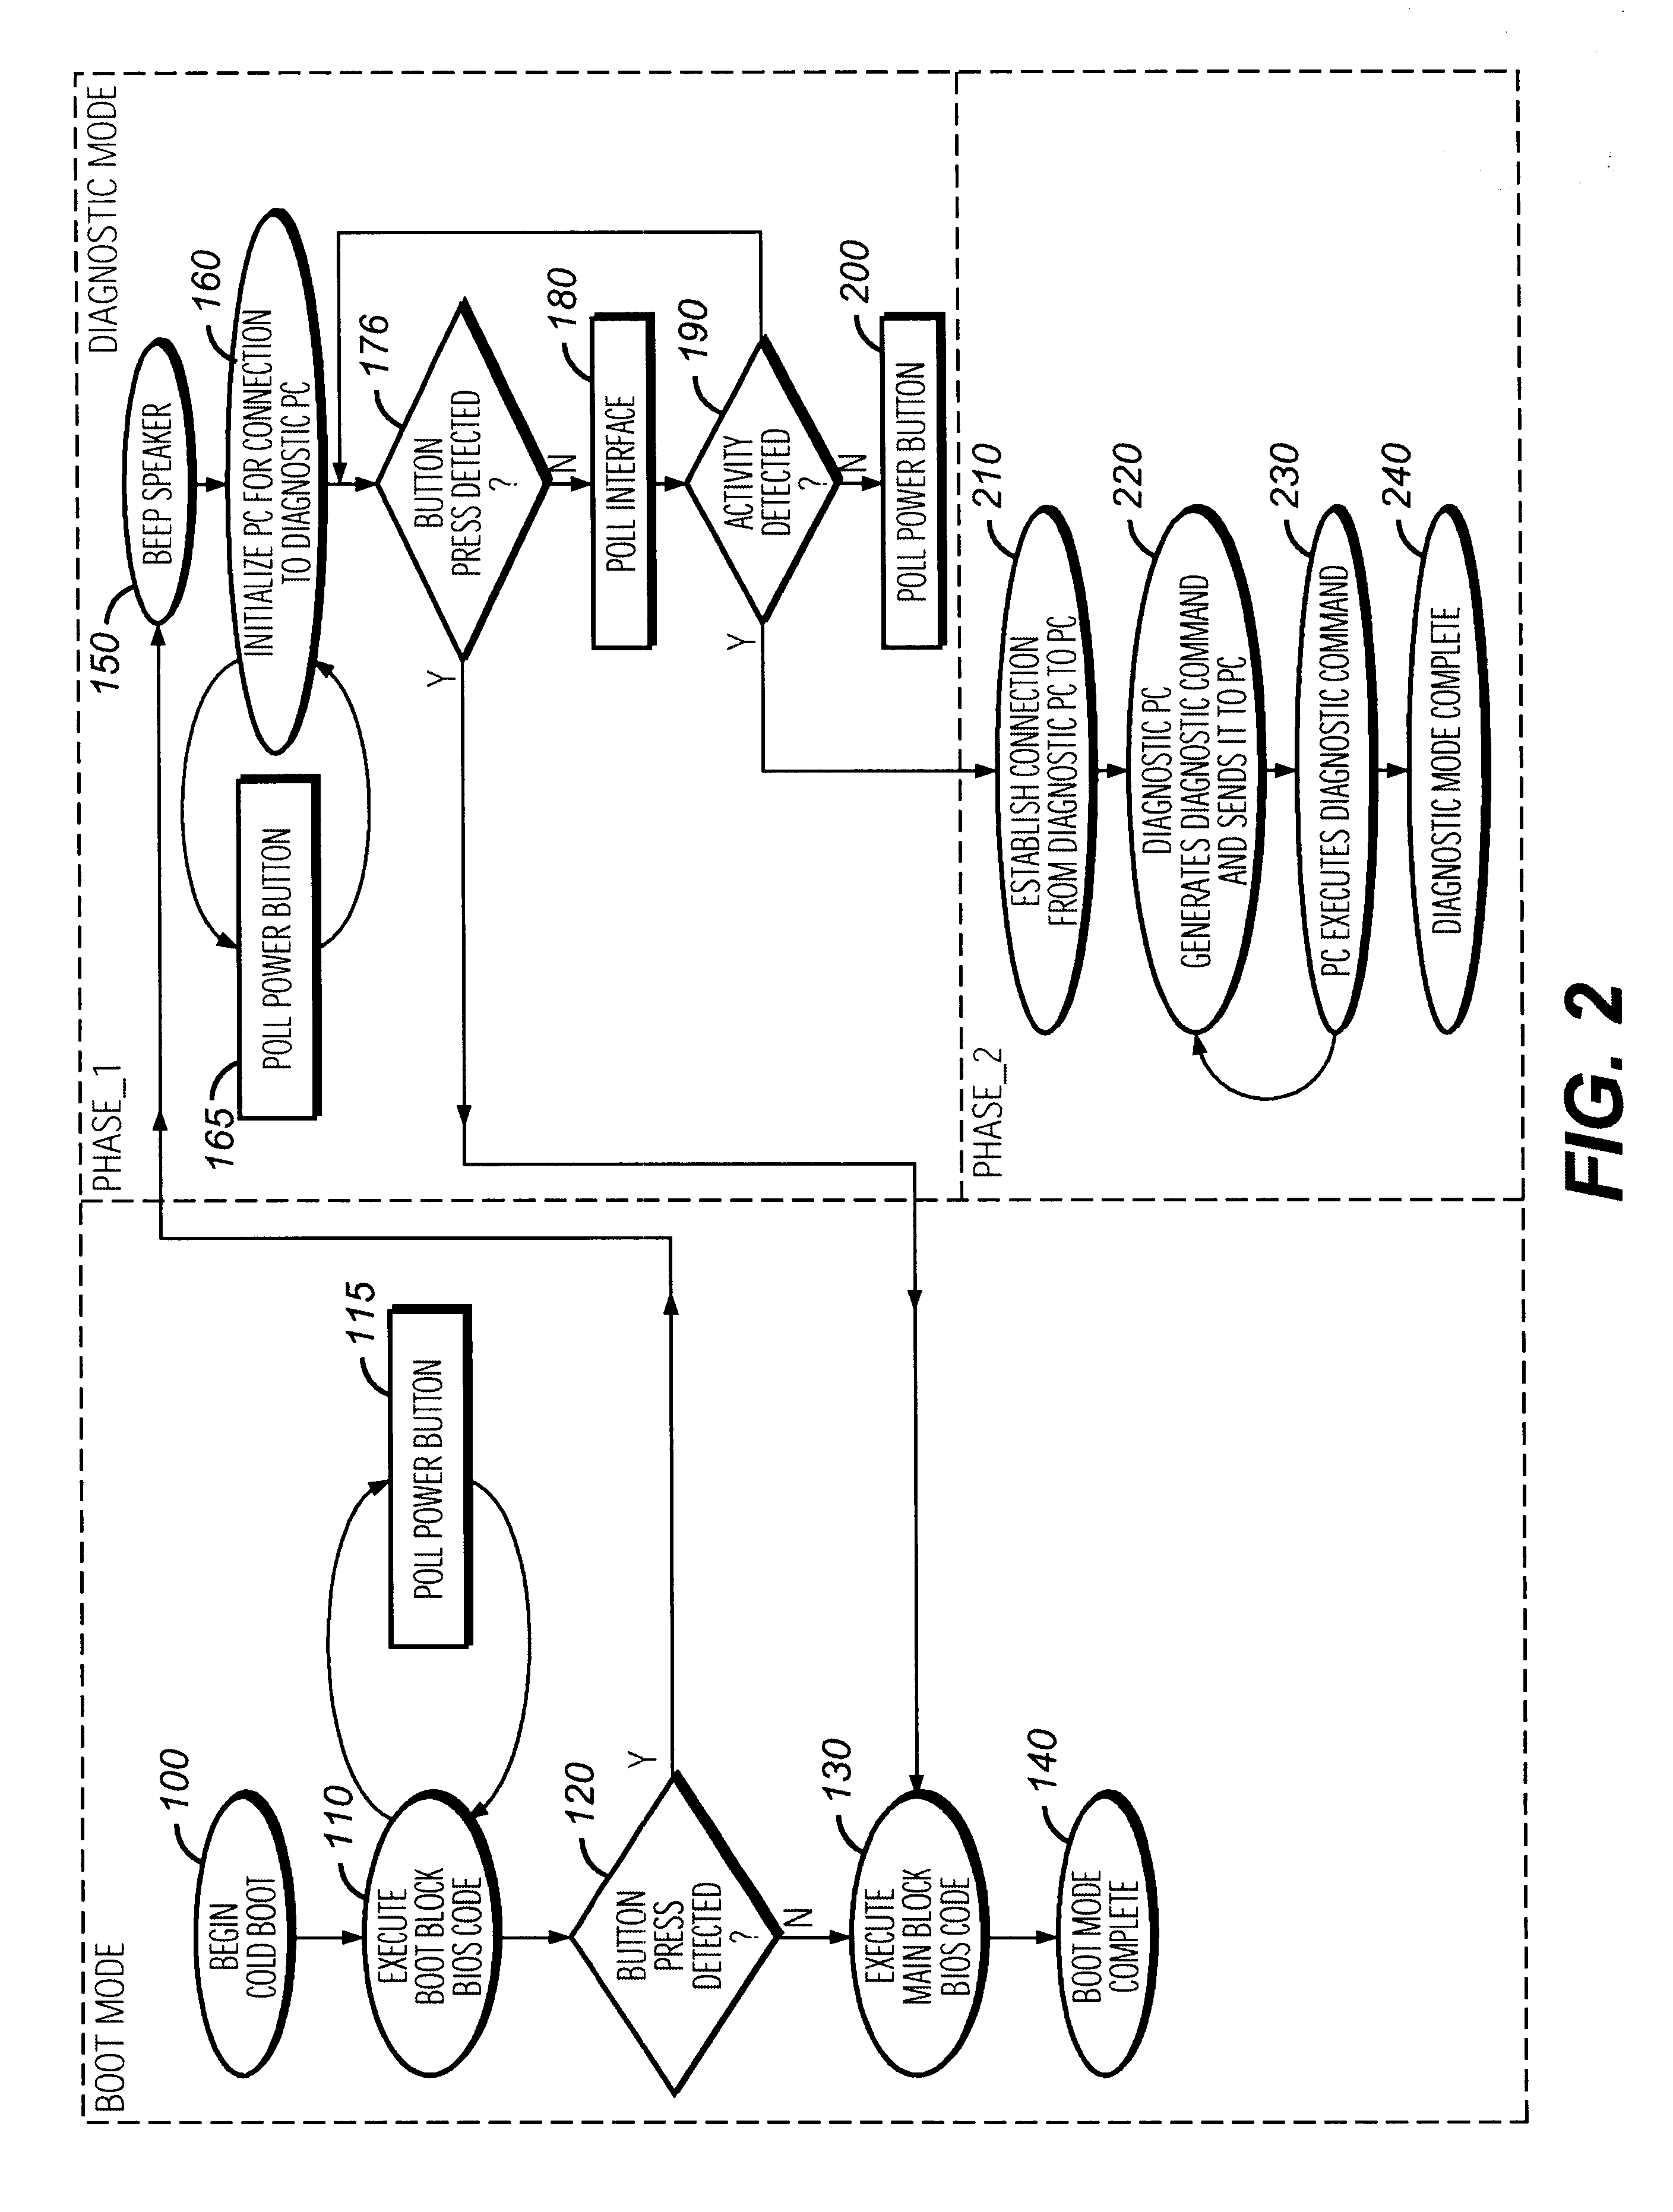 Power button controlled diagnostic mode for an information appliance